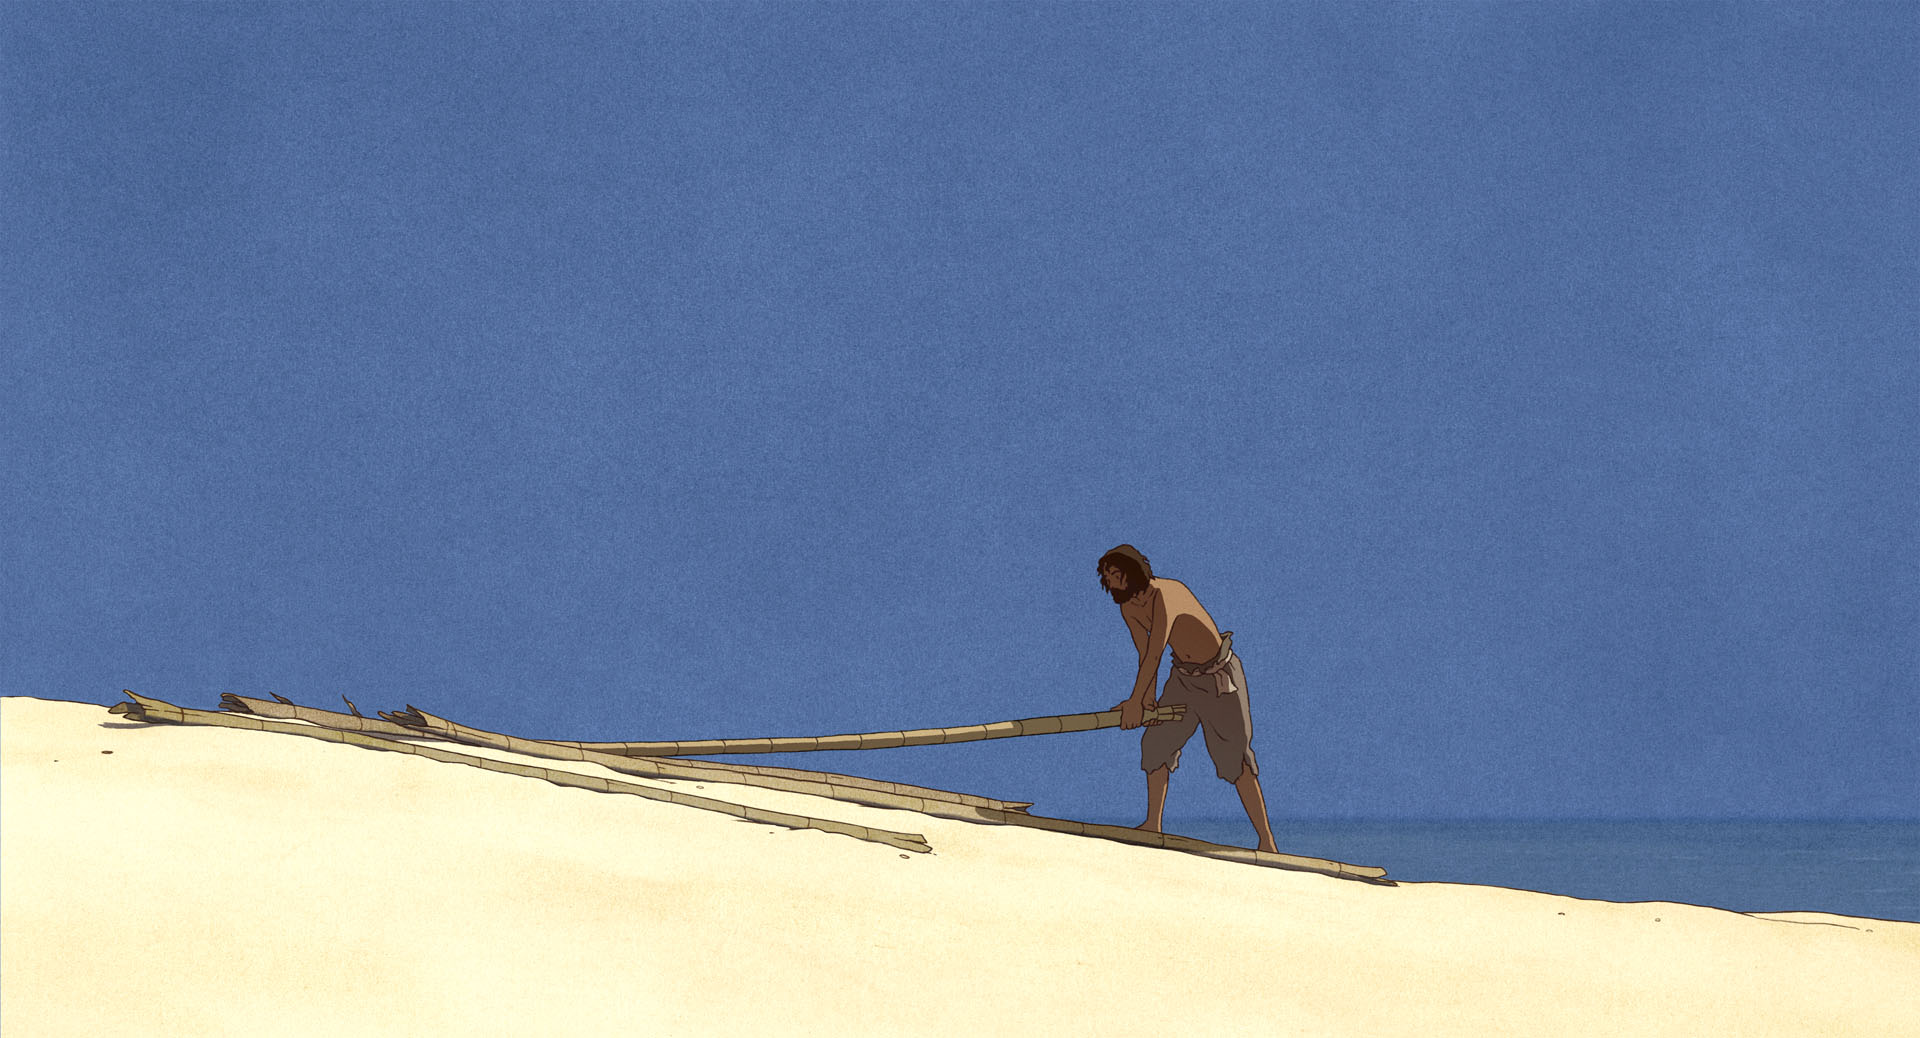 A person building something with bamboo, from The Red Turtle